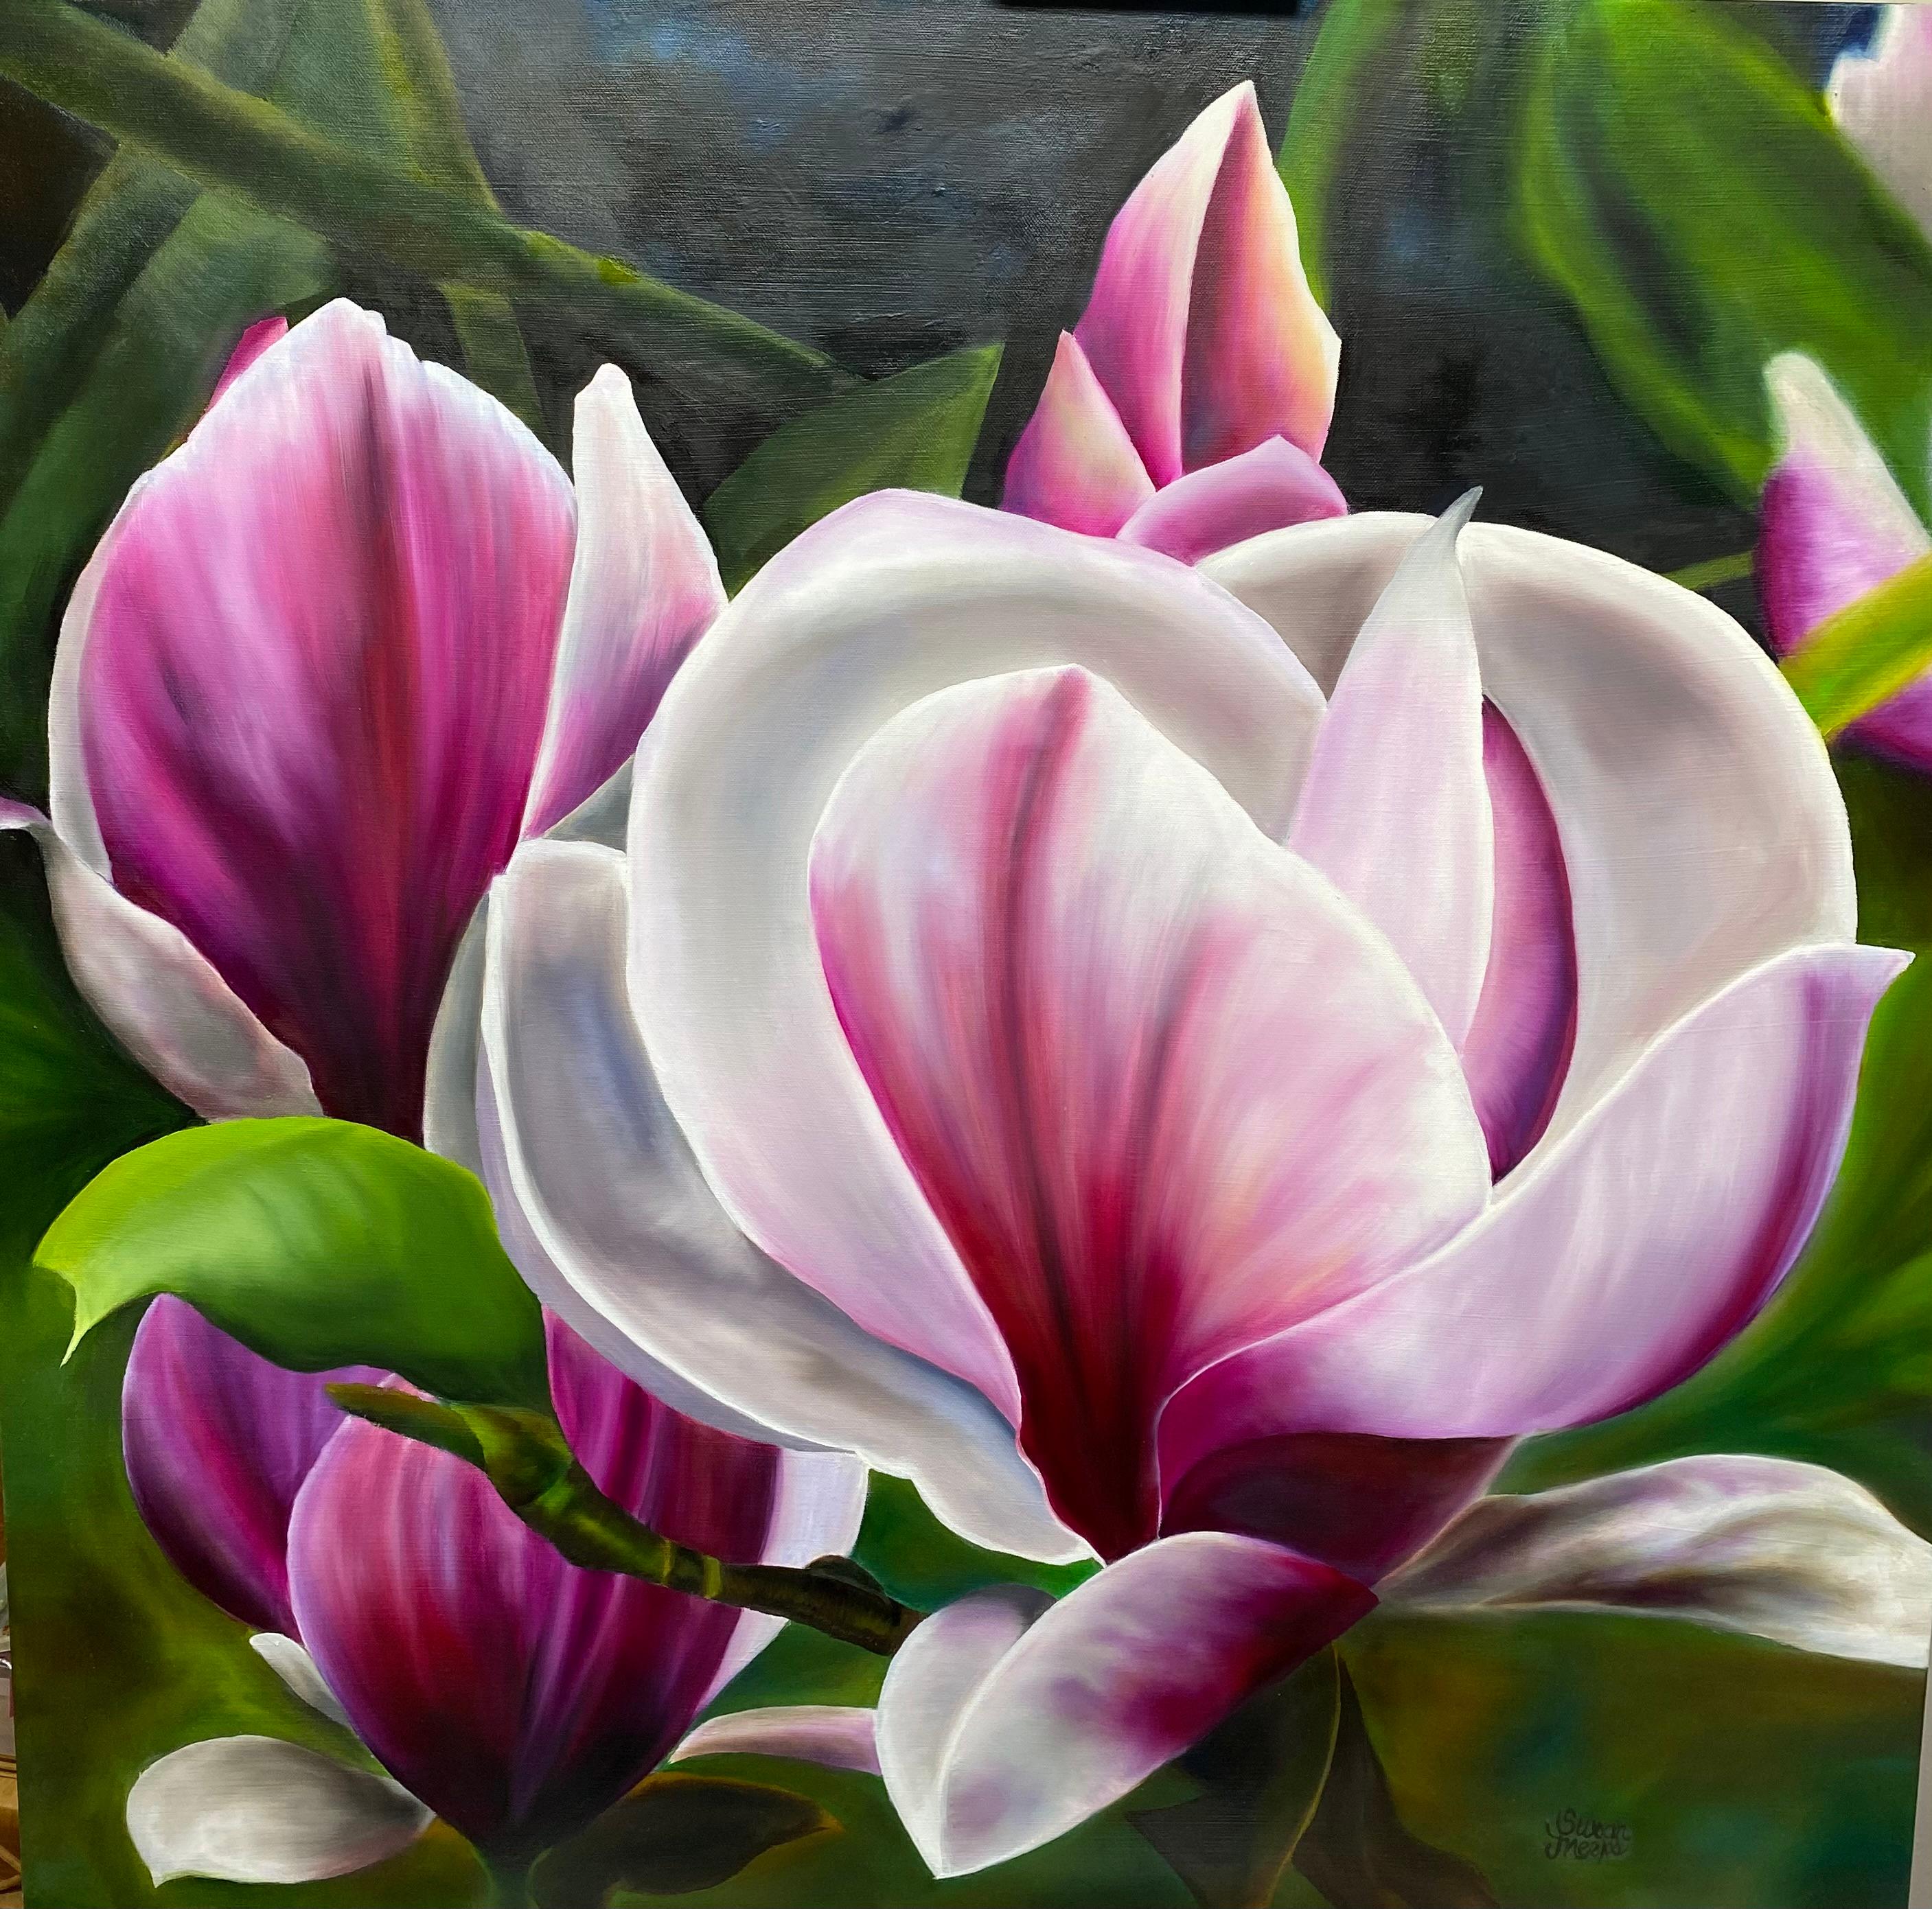 Susan Meeks Landscape Painting - Magenta Magnolia  Realism 36 x 36 Oil  Canvas Gallery Wrapped  Floral Painting 